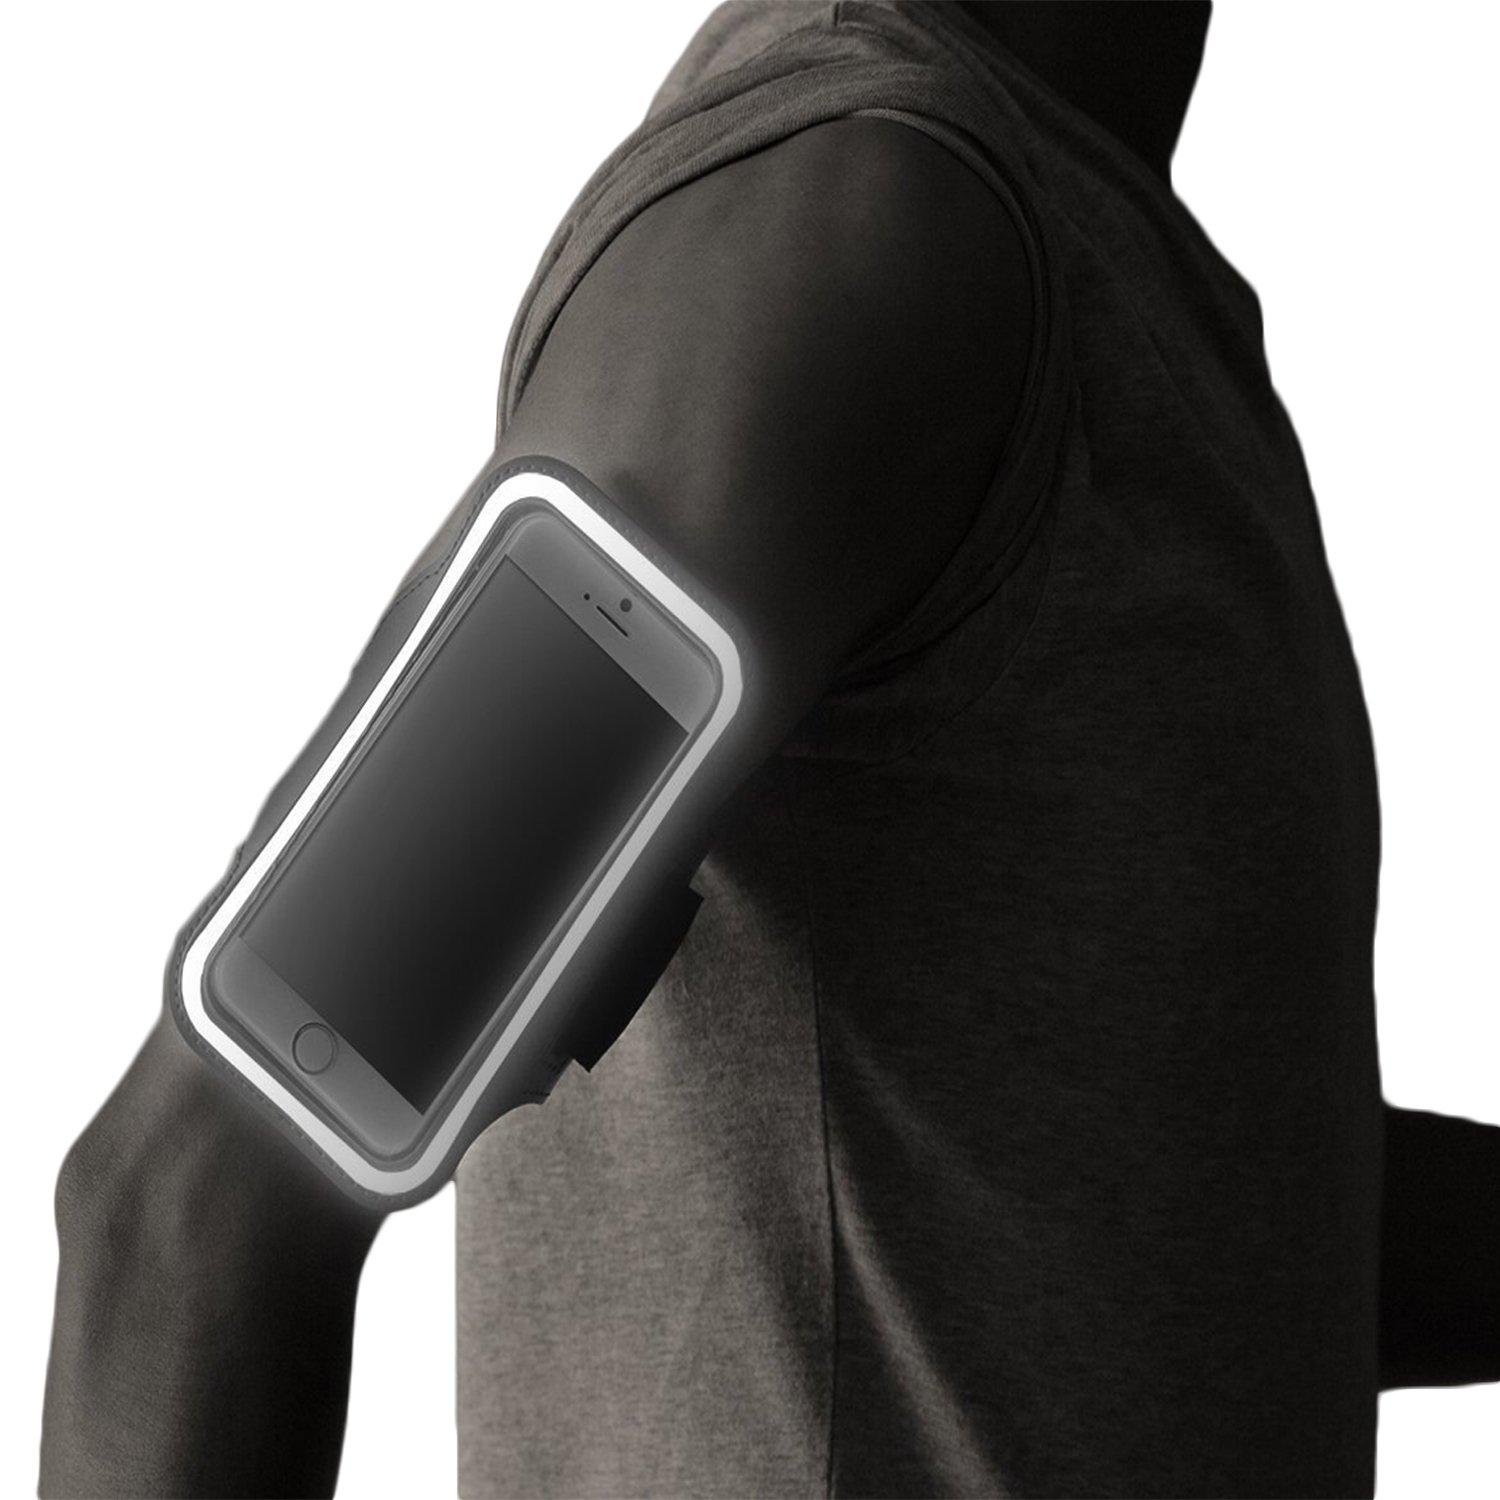 RevereSport Waterproof iPhone 15/14/13/12 Running Armband with Extra Pockets for Keys, Cash and Credit Cards. Phone Arm Holder for Sports, Gym Workouts and Exercise